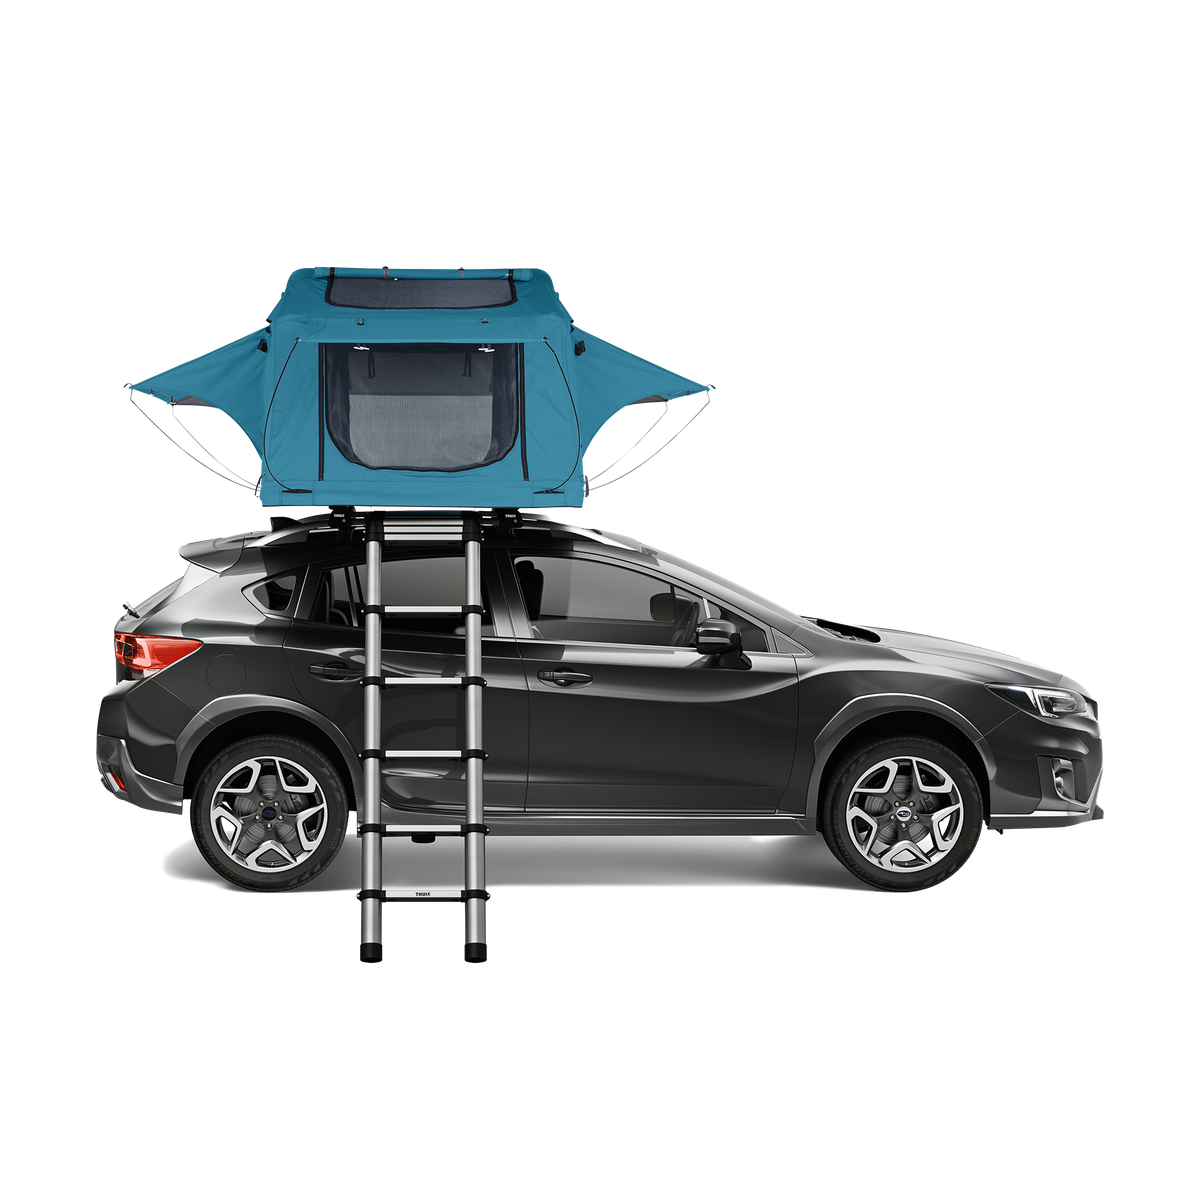 Thule Tepui Ayer 2-person roof top tent blue